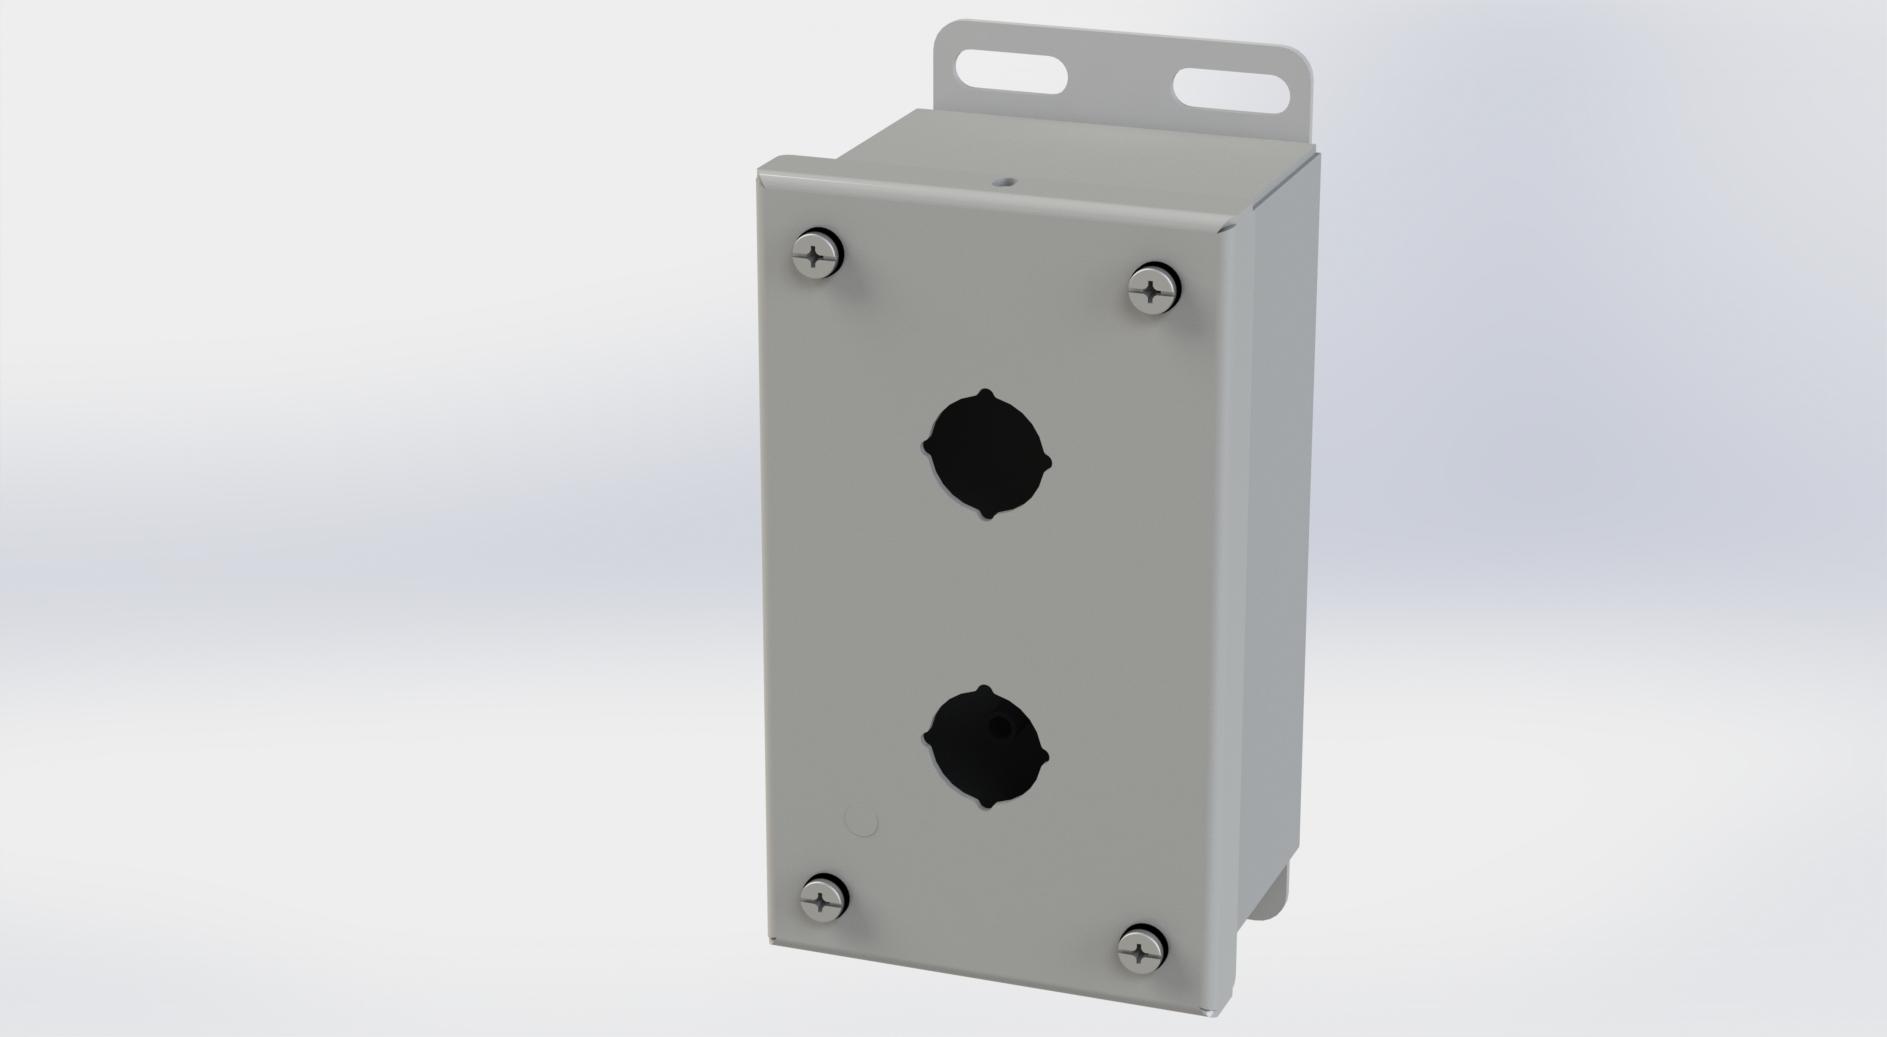 Saginaw Control SCE-2PBI PB Enclosure, Height:5.75", Width:3.25", Depth:2.75", ANSI-61 gray powder coat inside and out. 